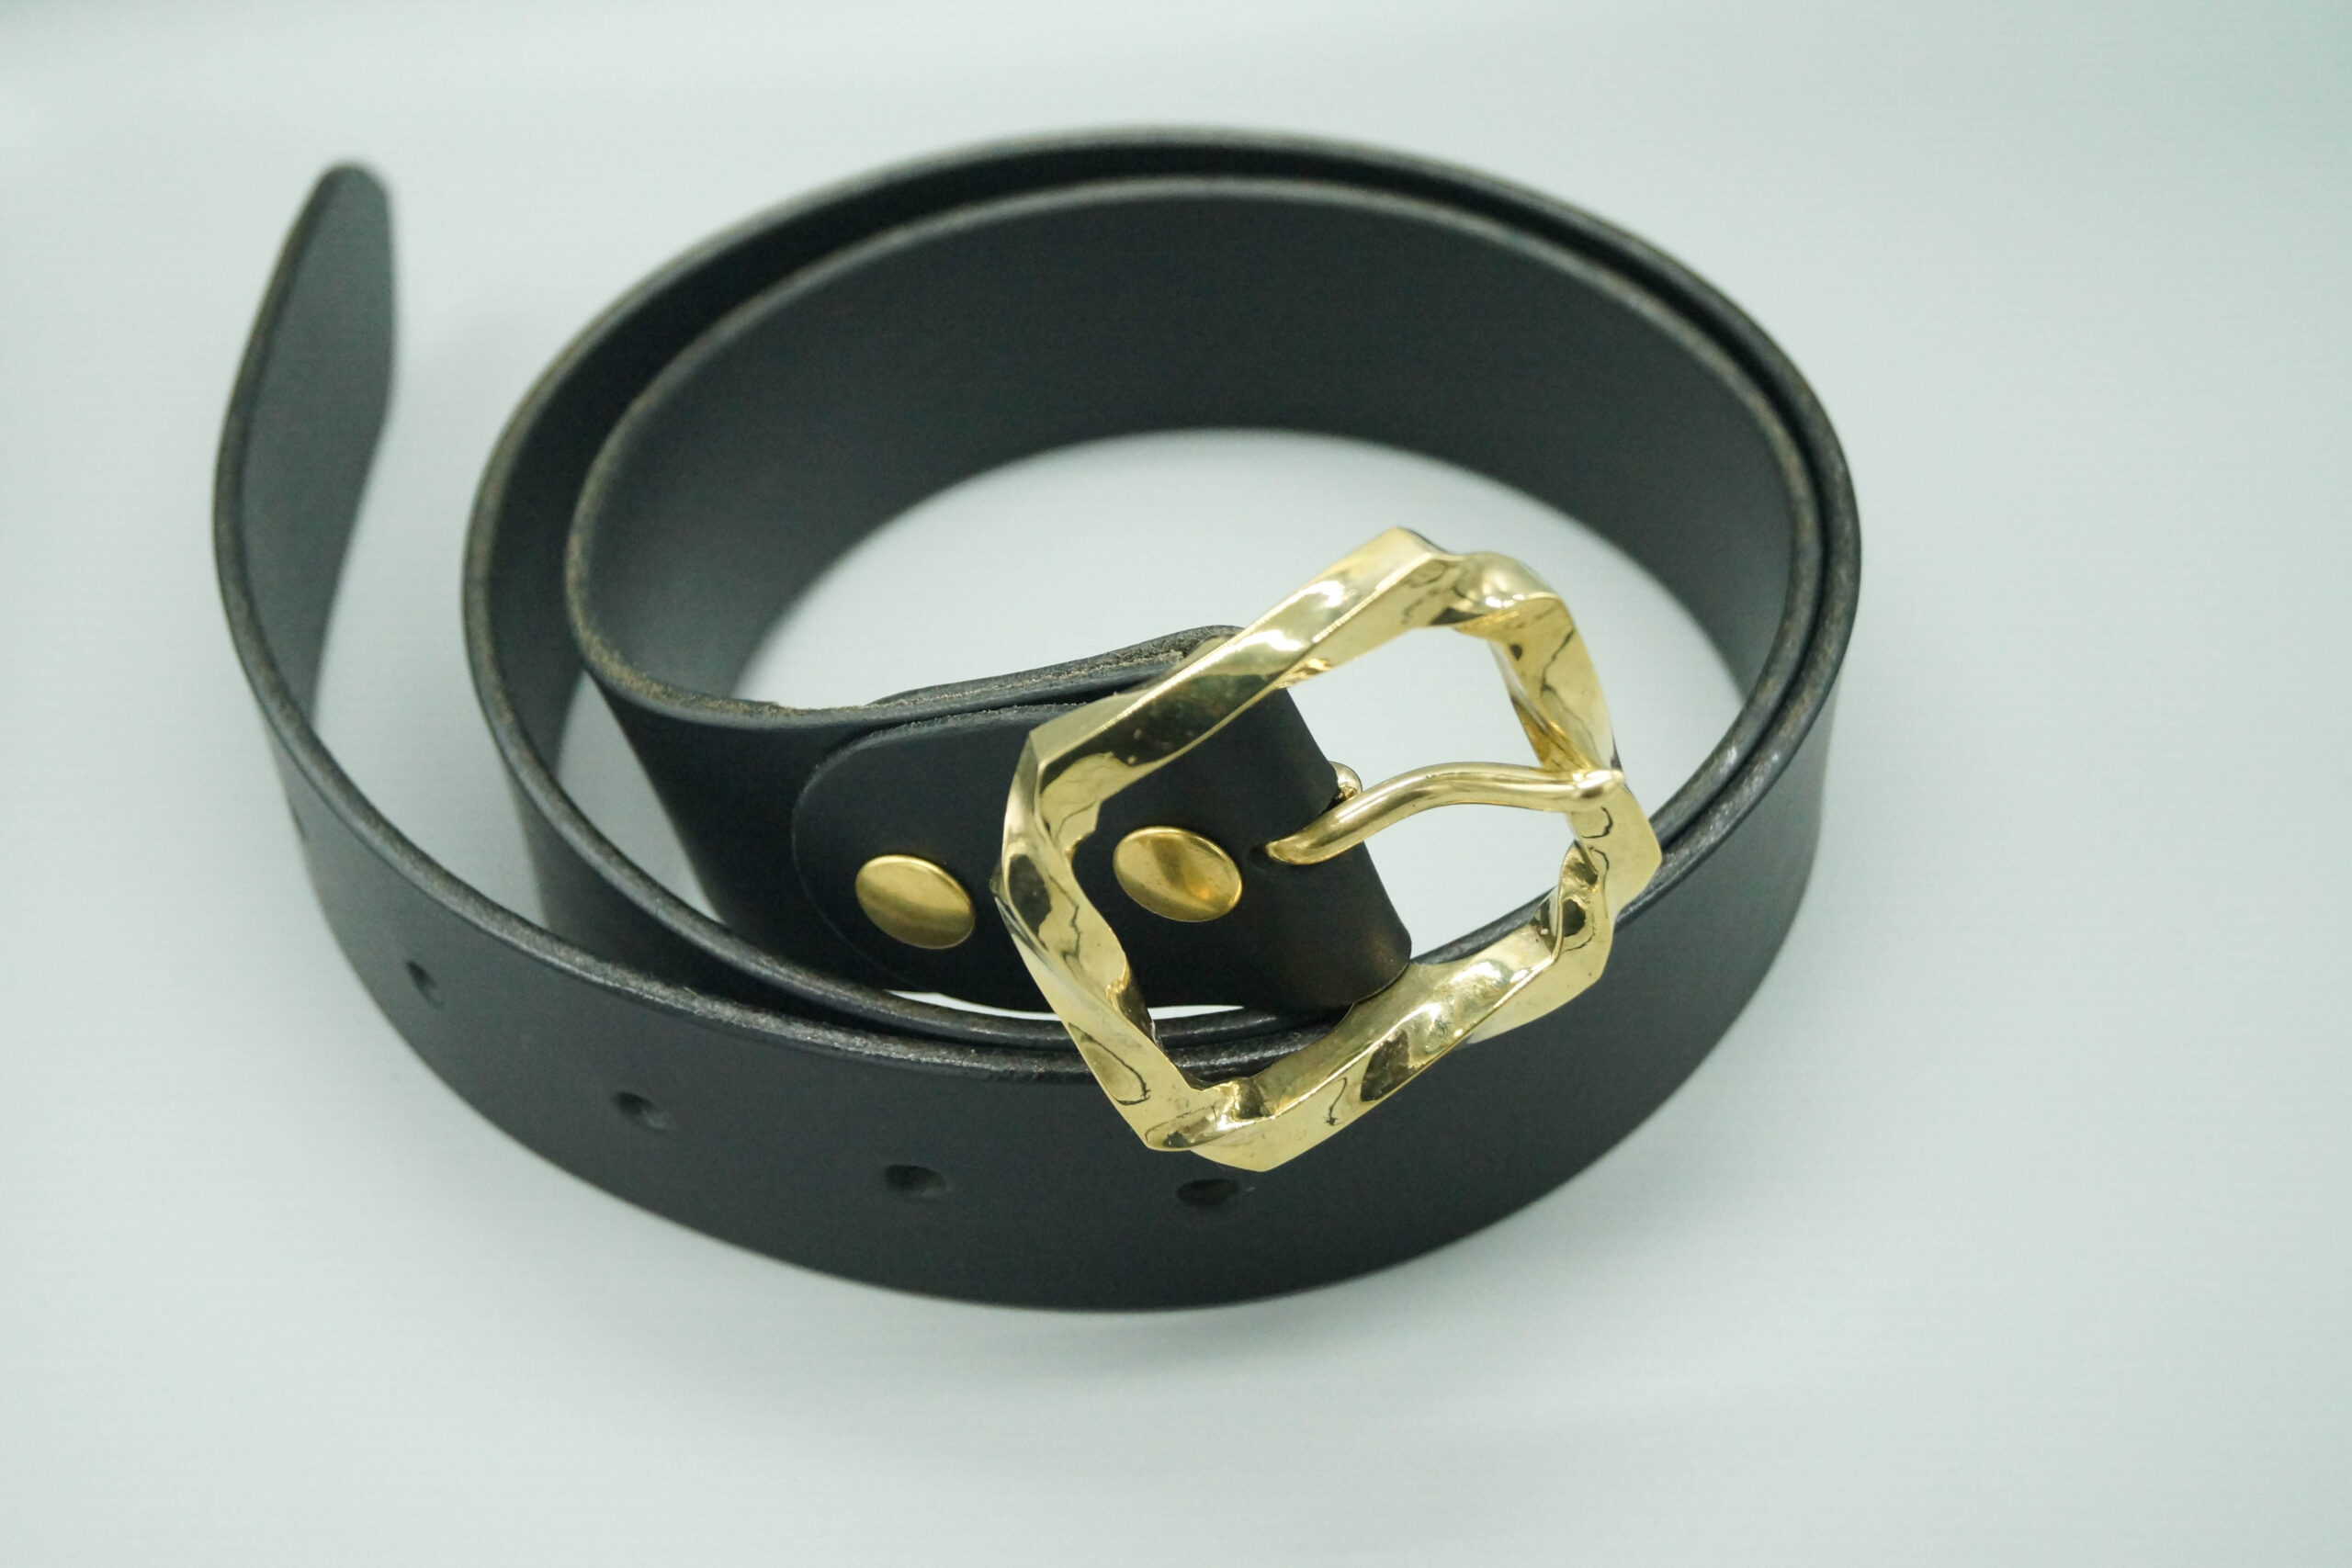 Twisted-Rectangle-Buckle Belt